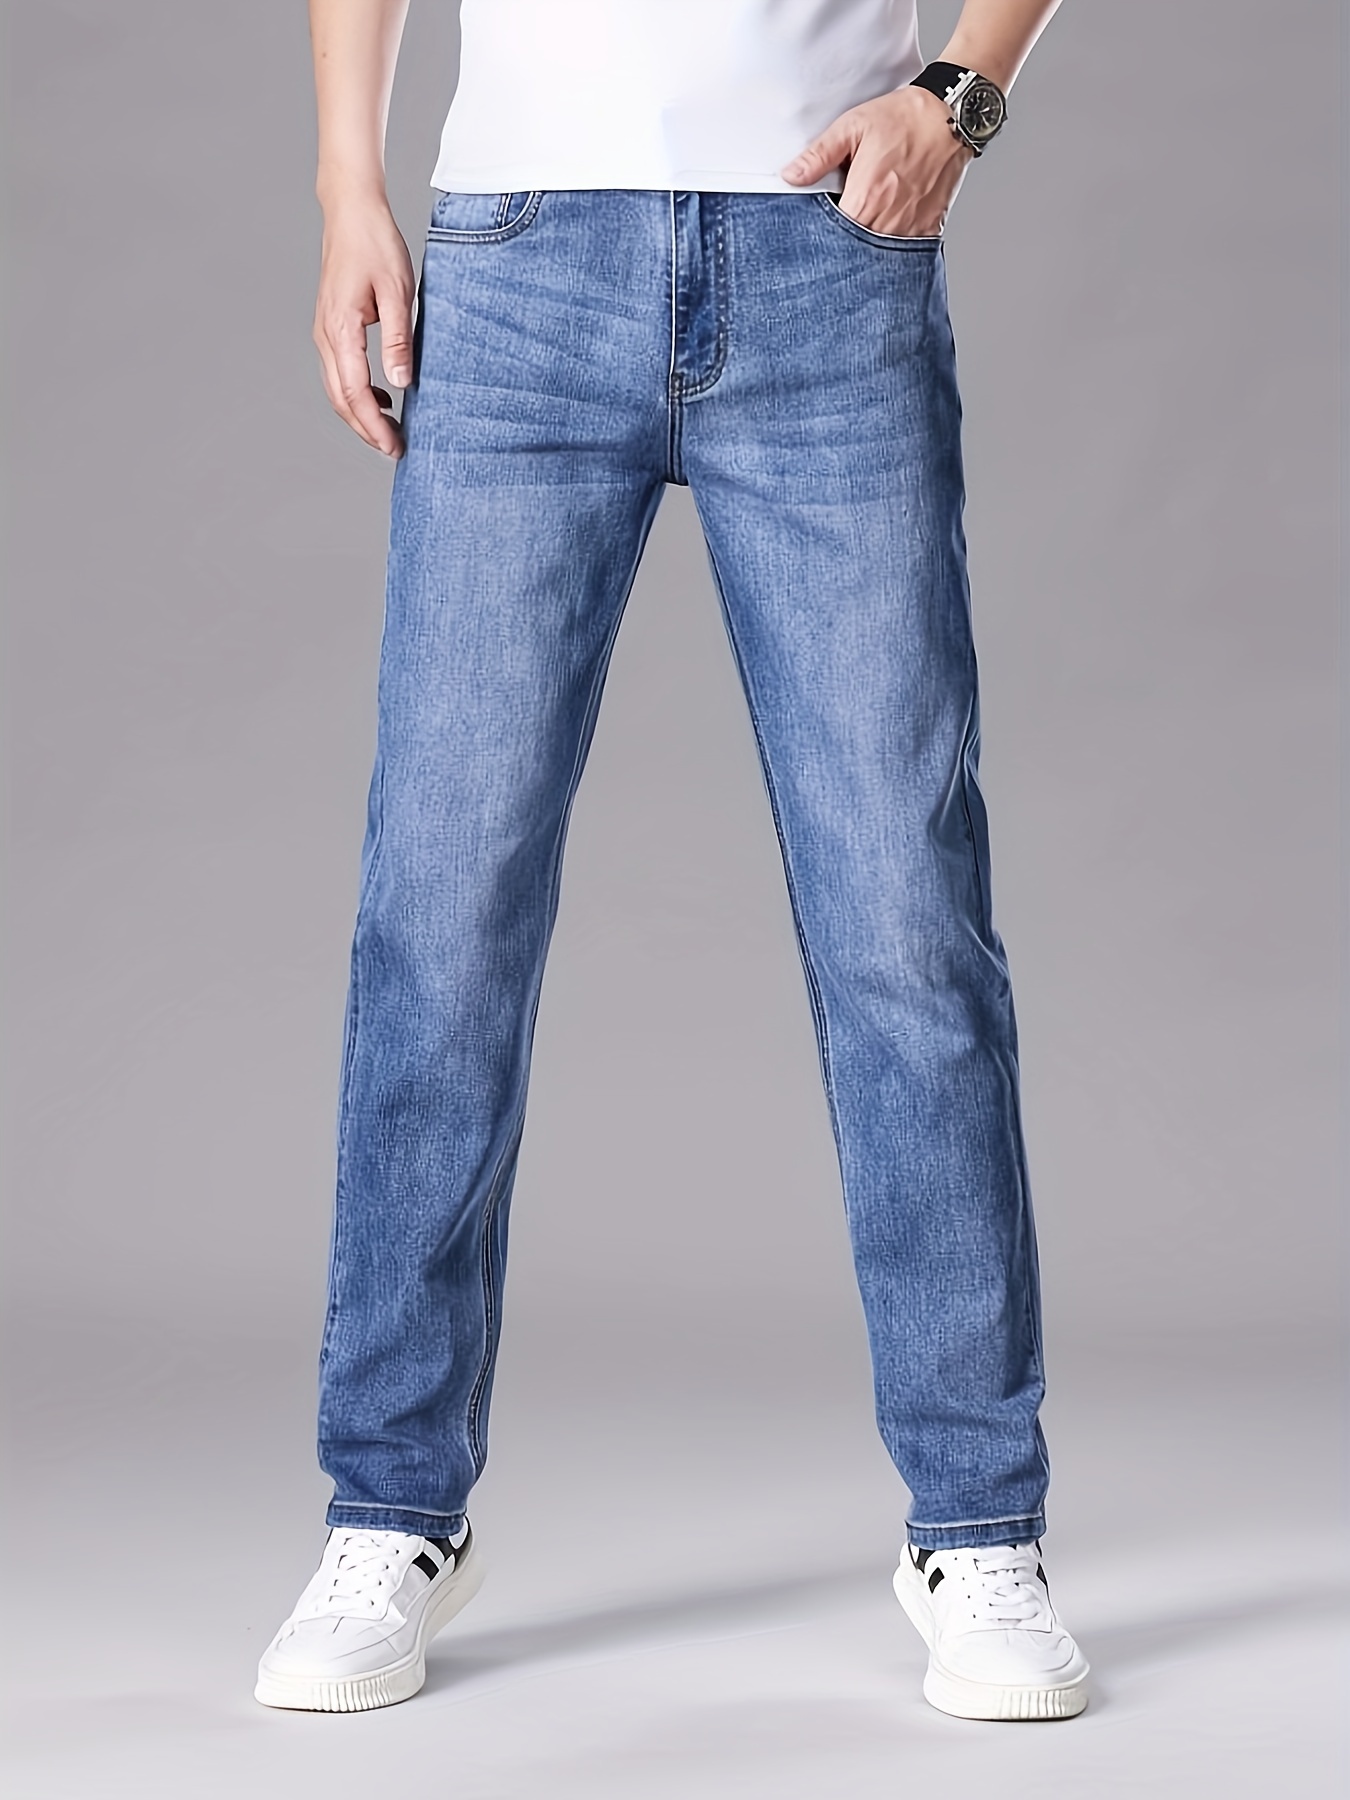 SHENGXINY Summer Men Jeans Overalls With Pocket India